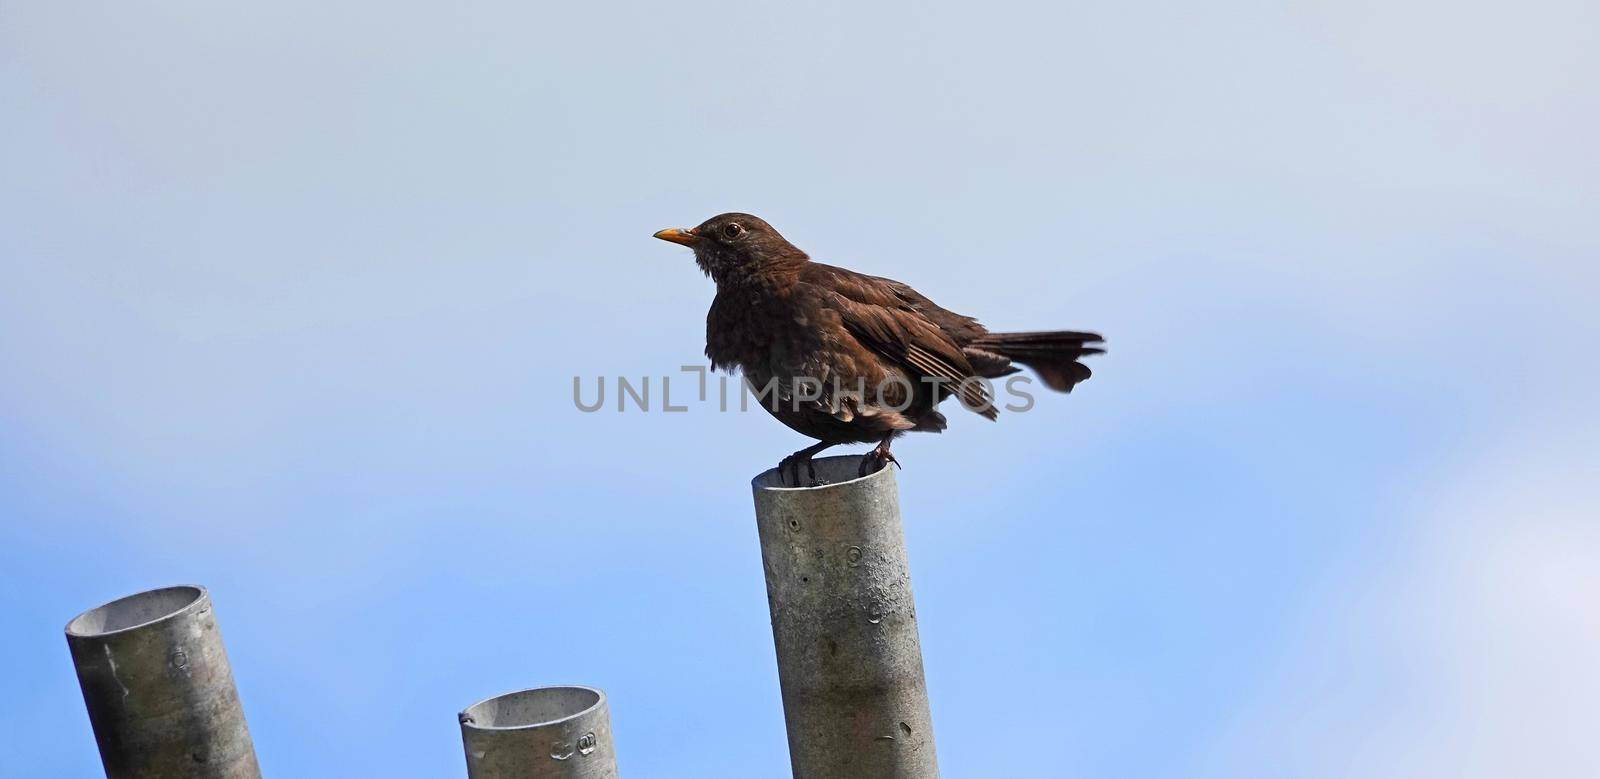 A young blackbird sitting on a pipe by WielandTeixeira